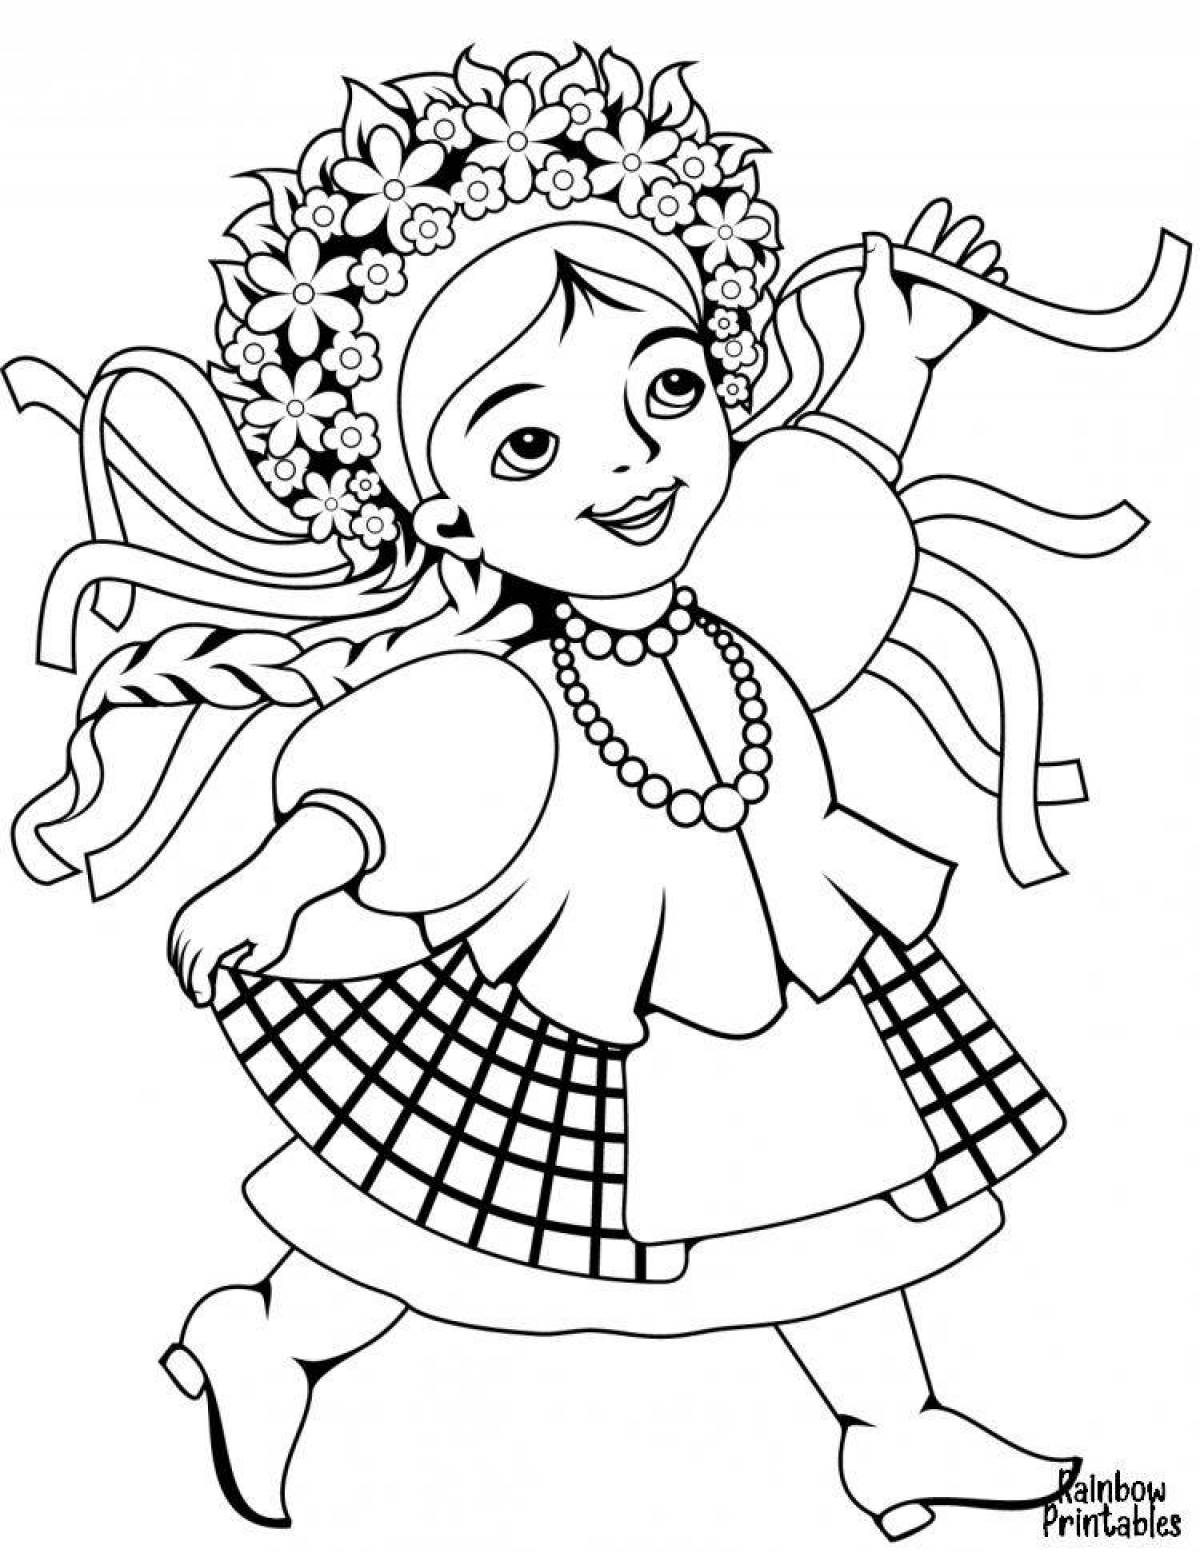 Attractive Belarusian costume coloring page